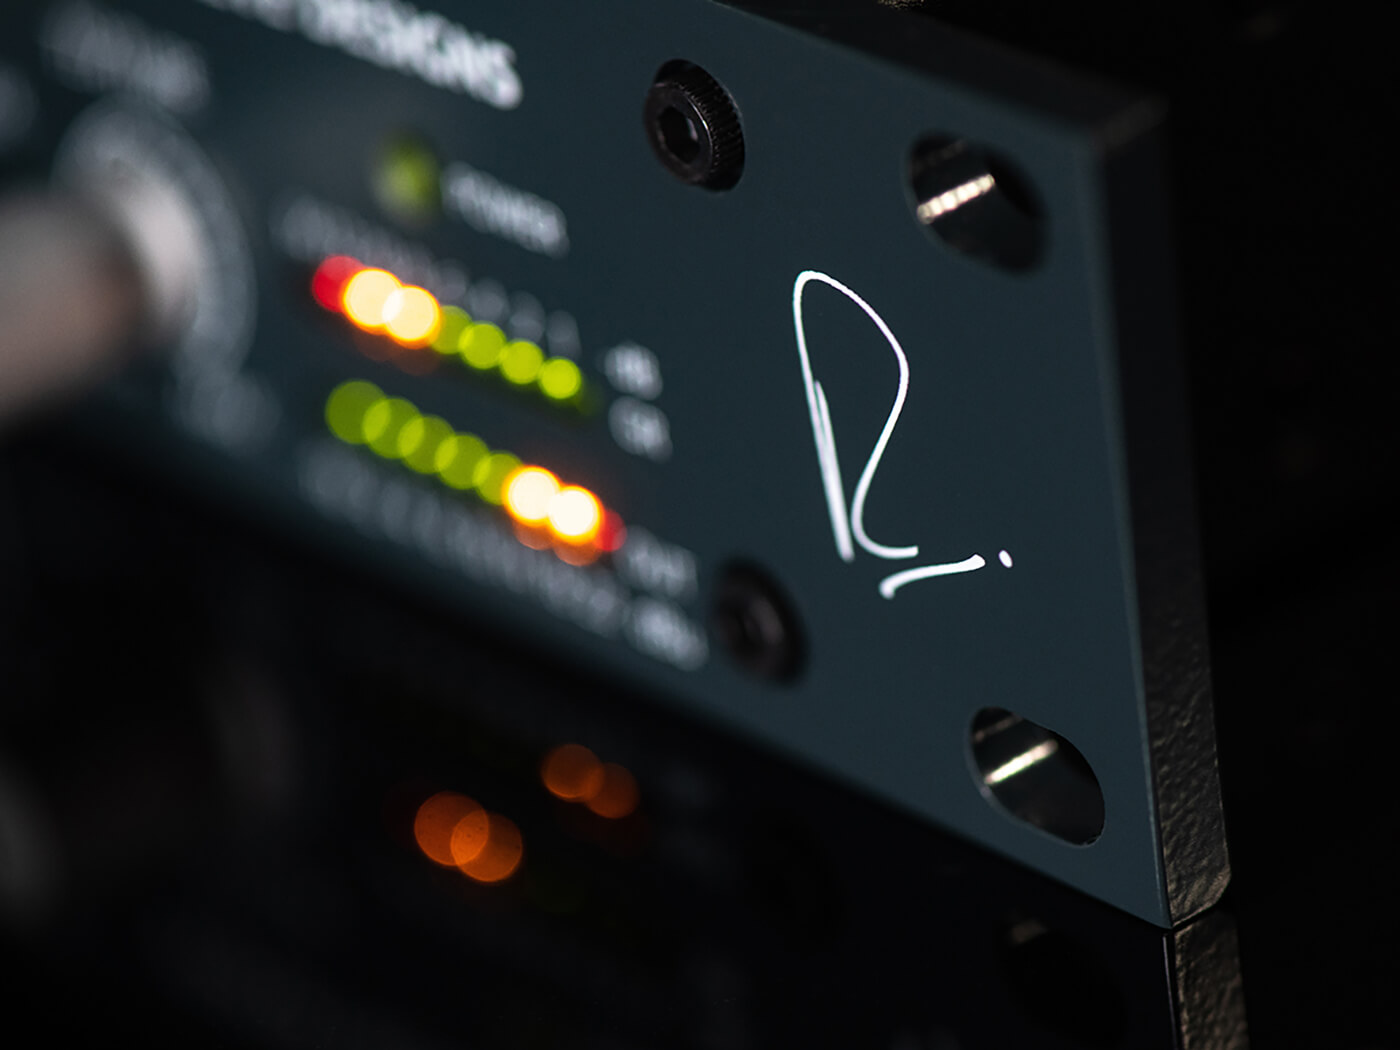 Rupert Neve’s signature on the Newton Channel